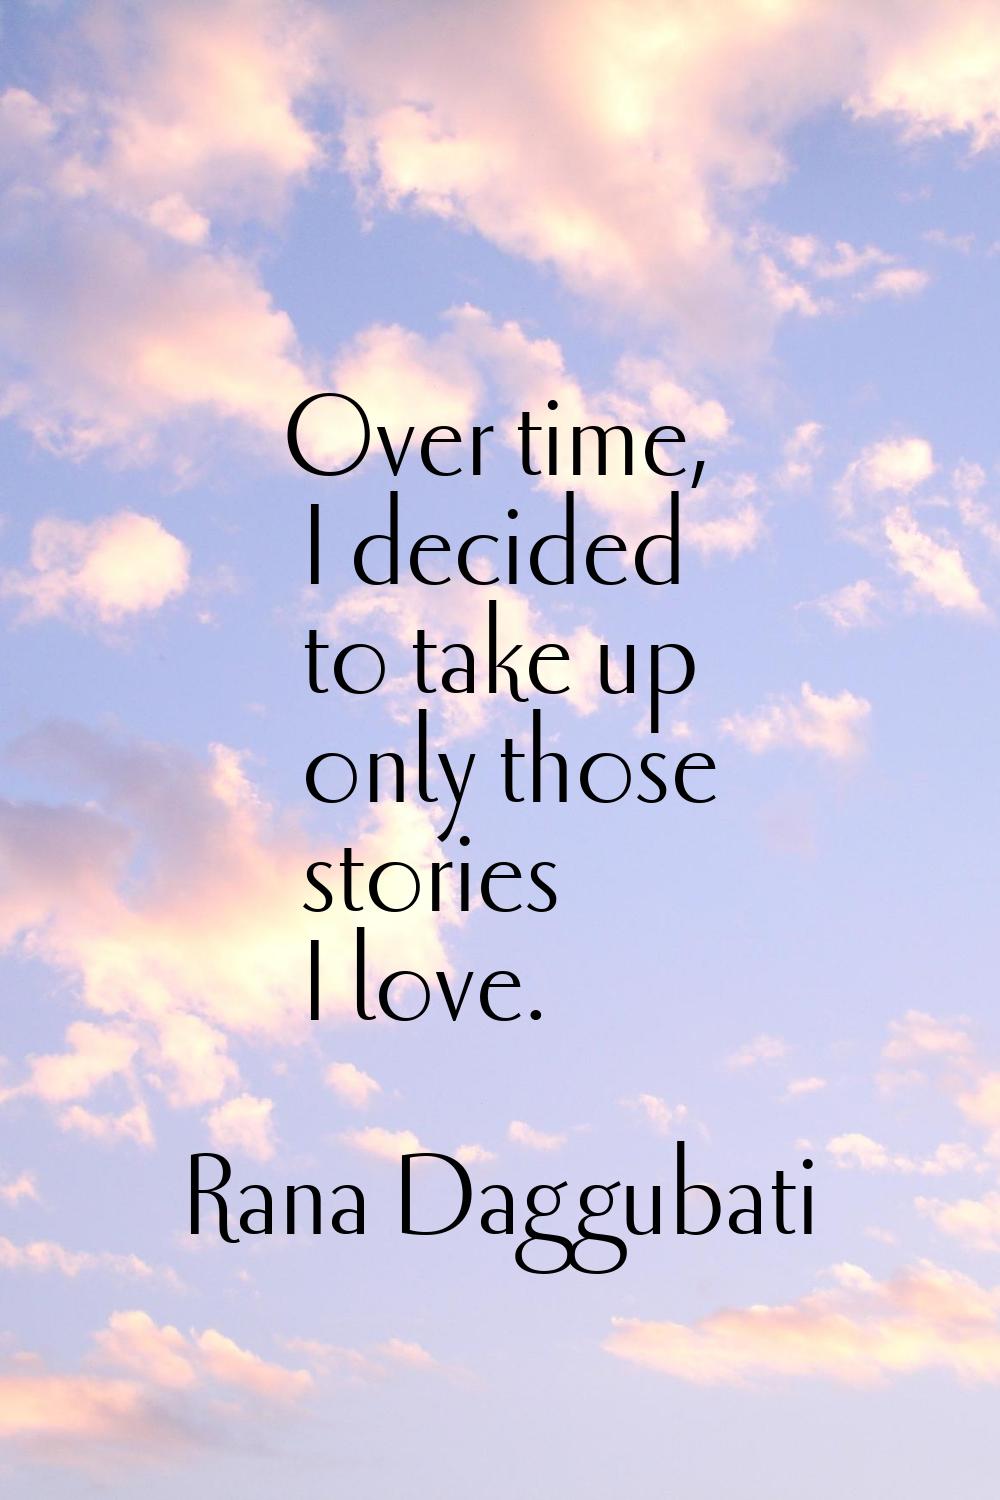 Over time, I decided to take up only those stories I love.